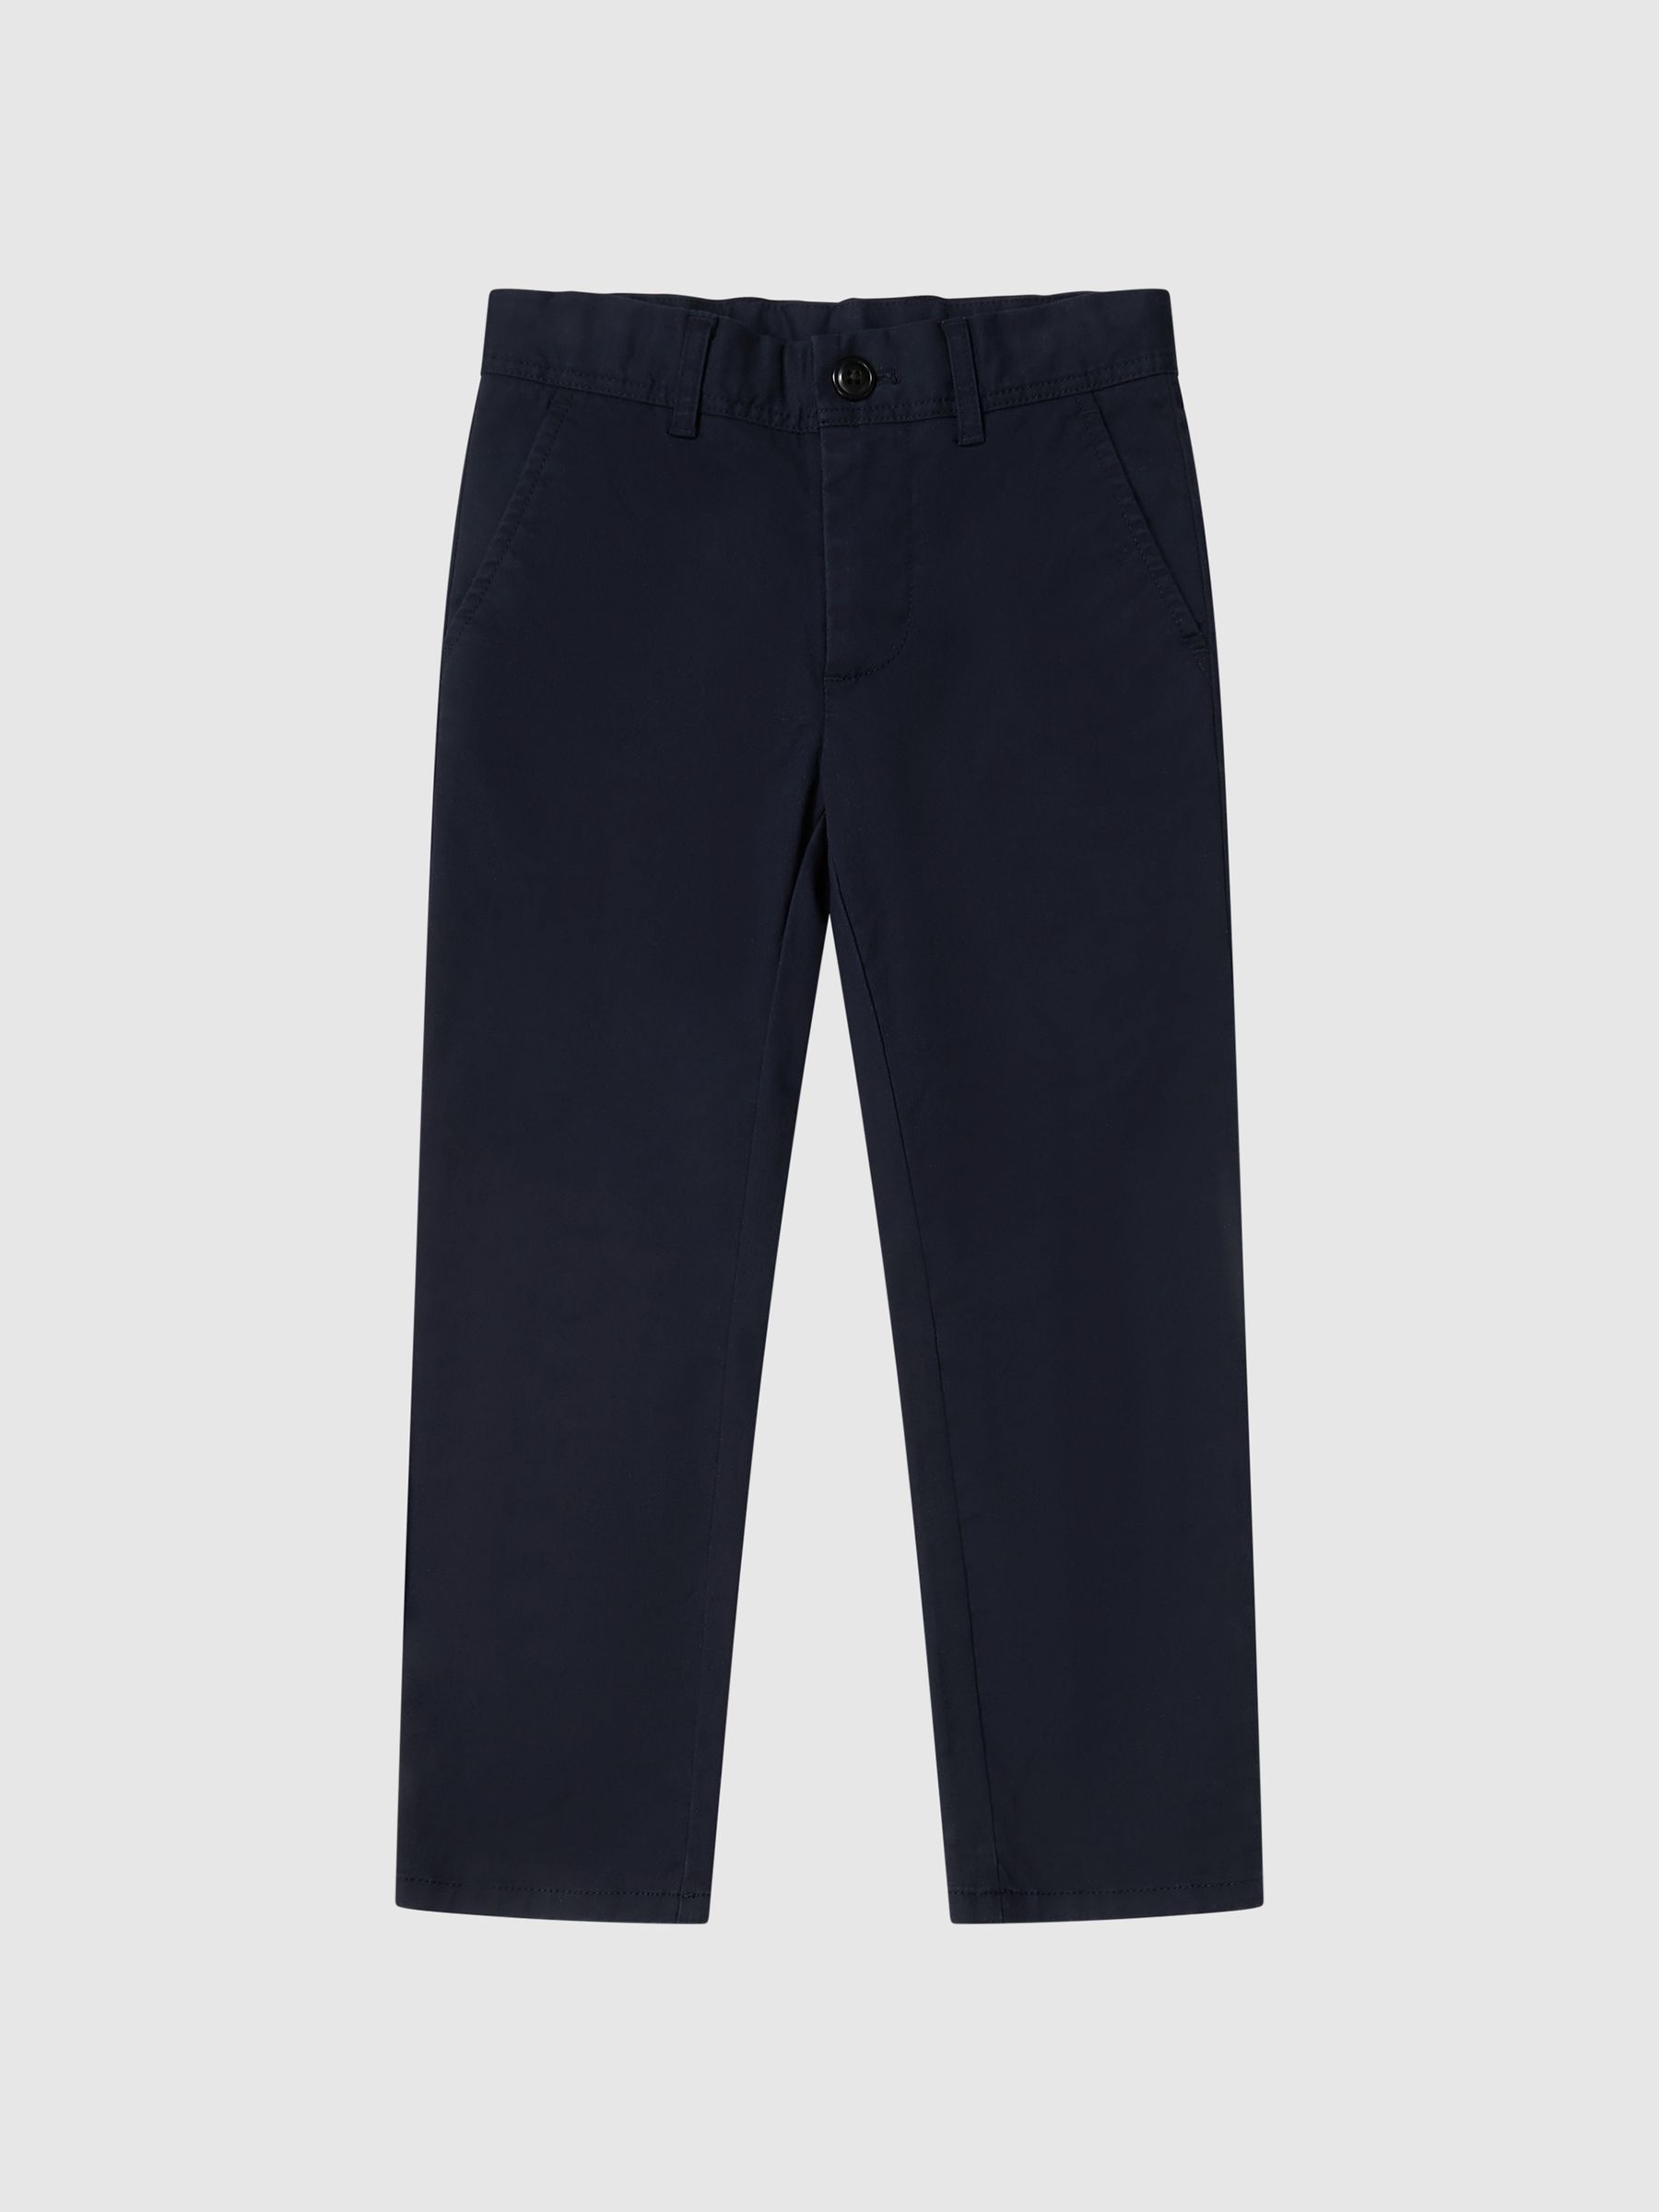 Reiss Pitch Junior Slim Fit Casual Chinos - REISS